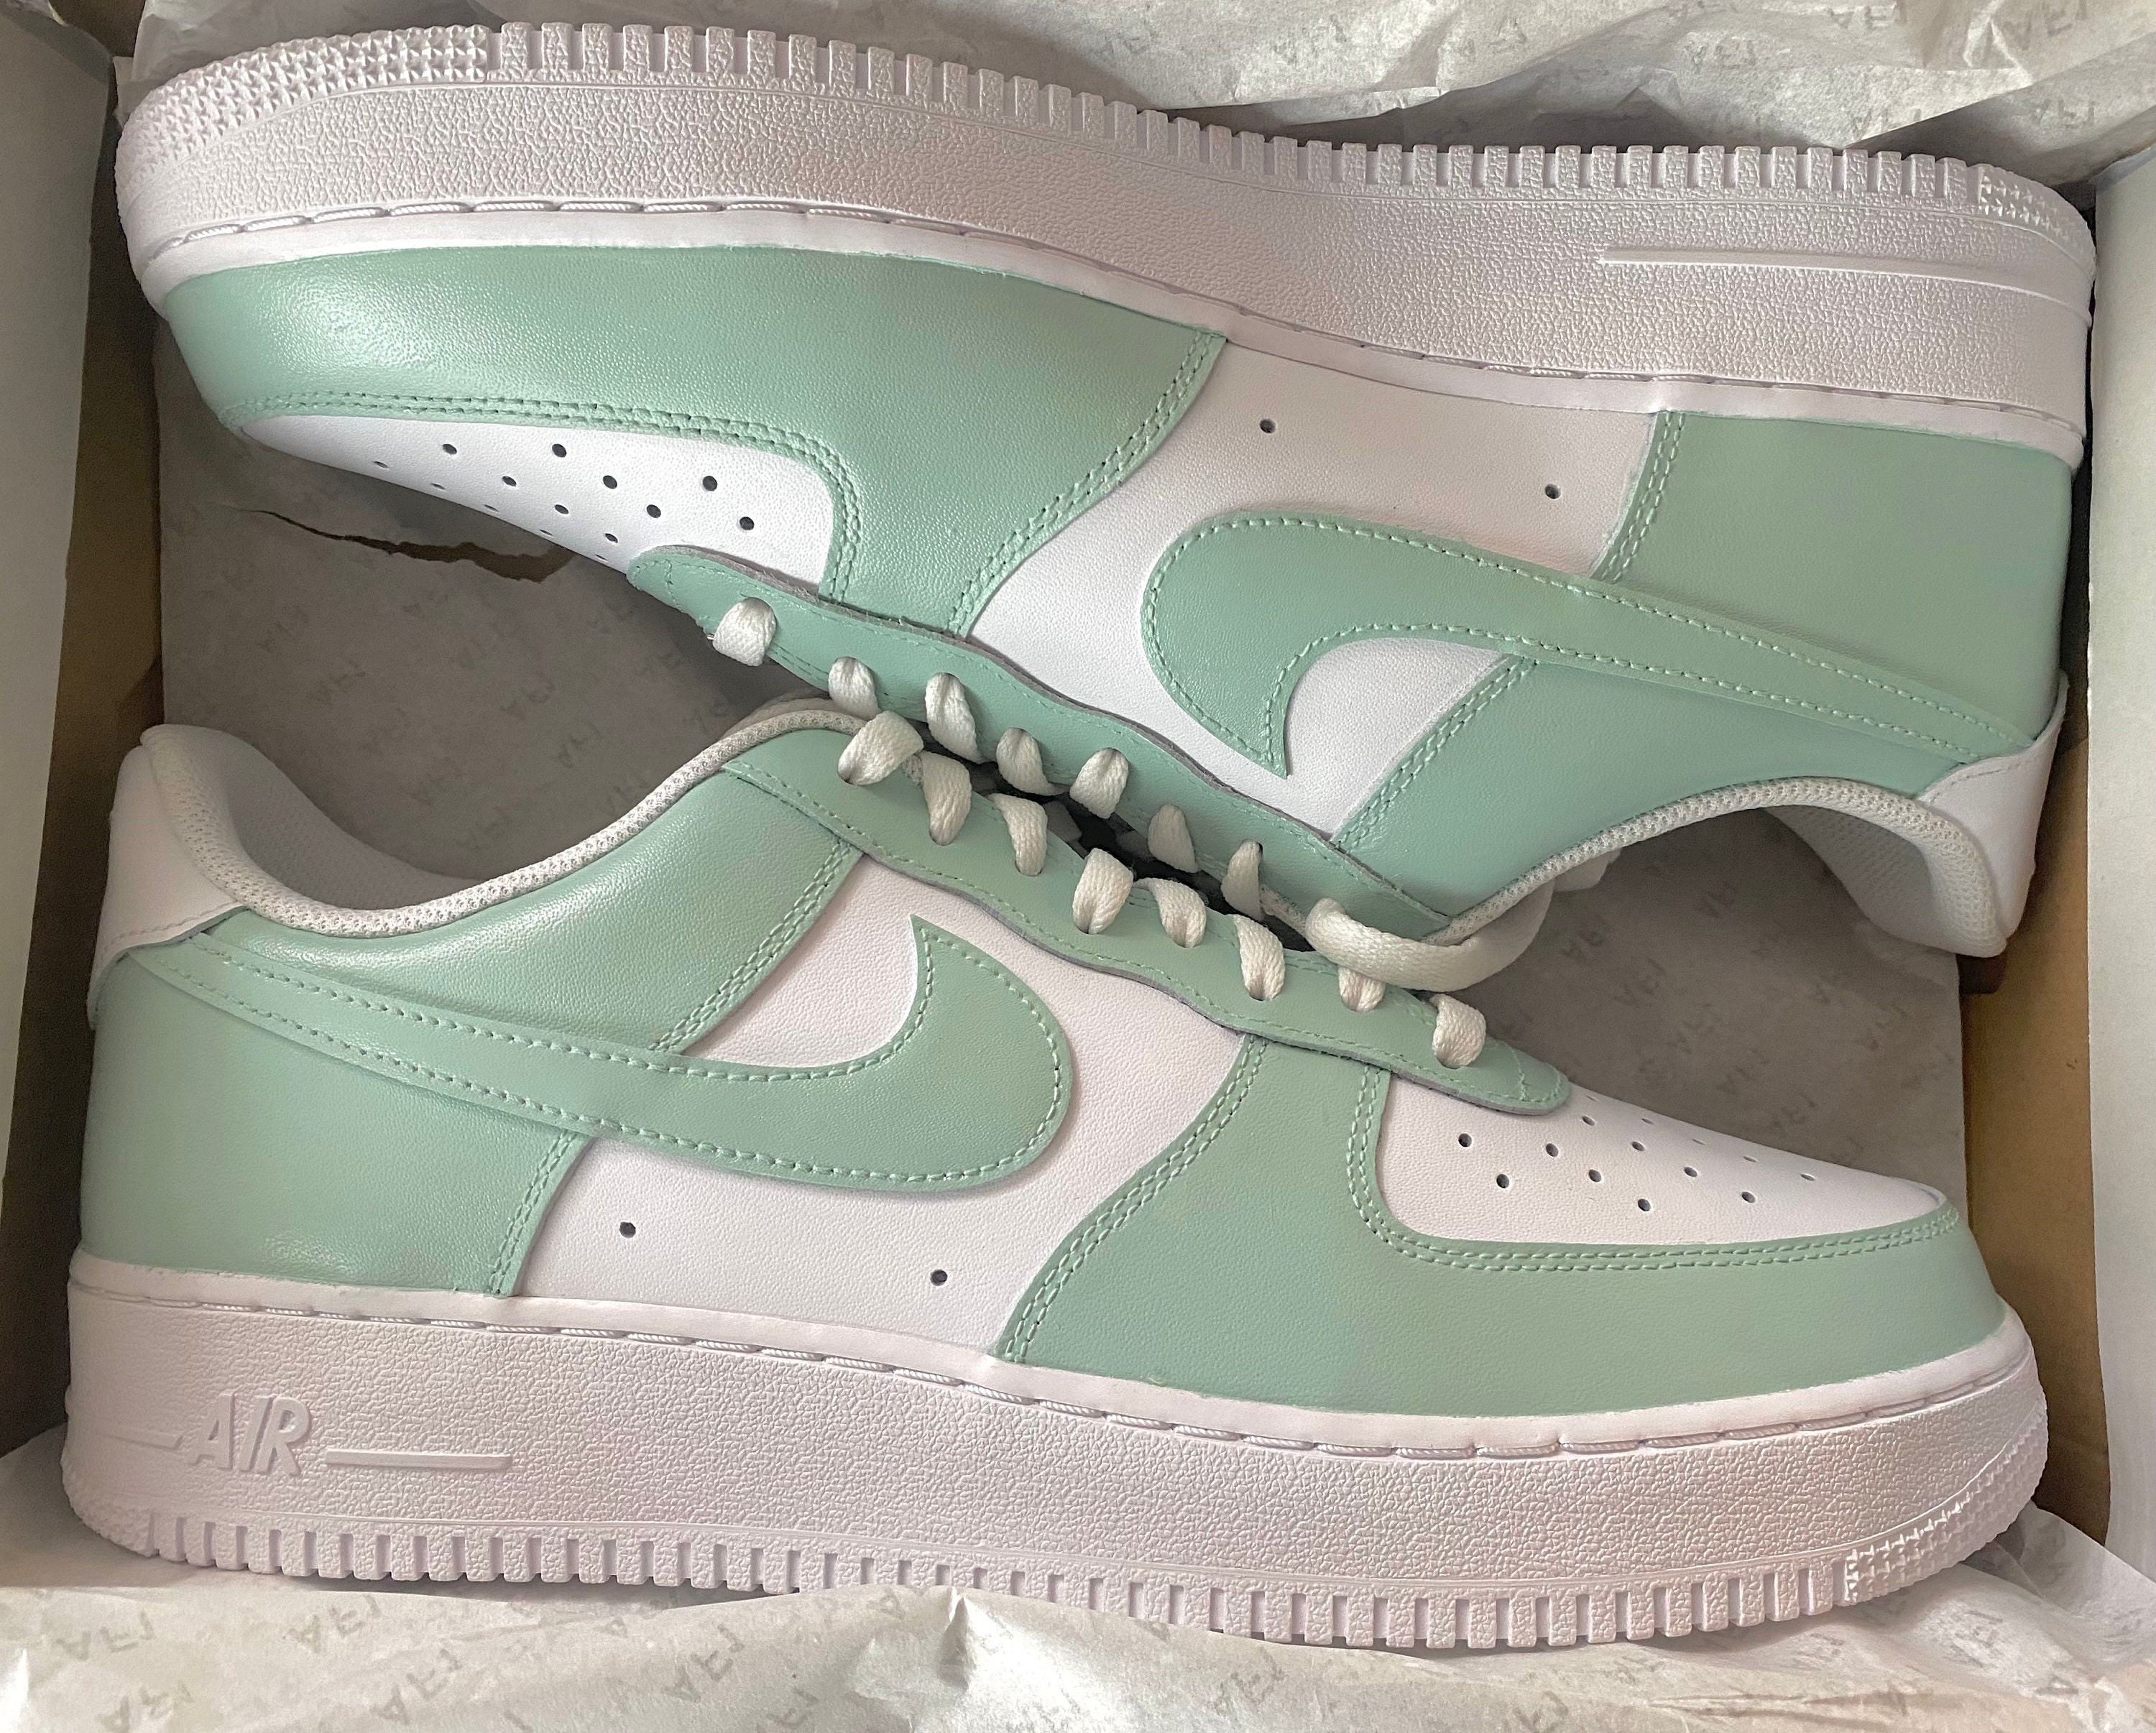 Custom Air etsy air force 1 Force 1 Mint Sage Green Sneaker Shoe Trainers